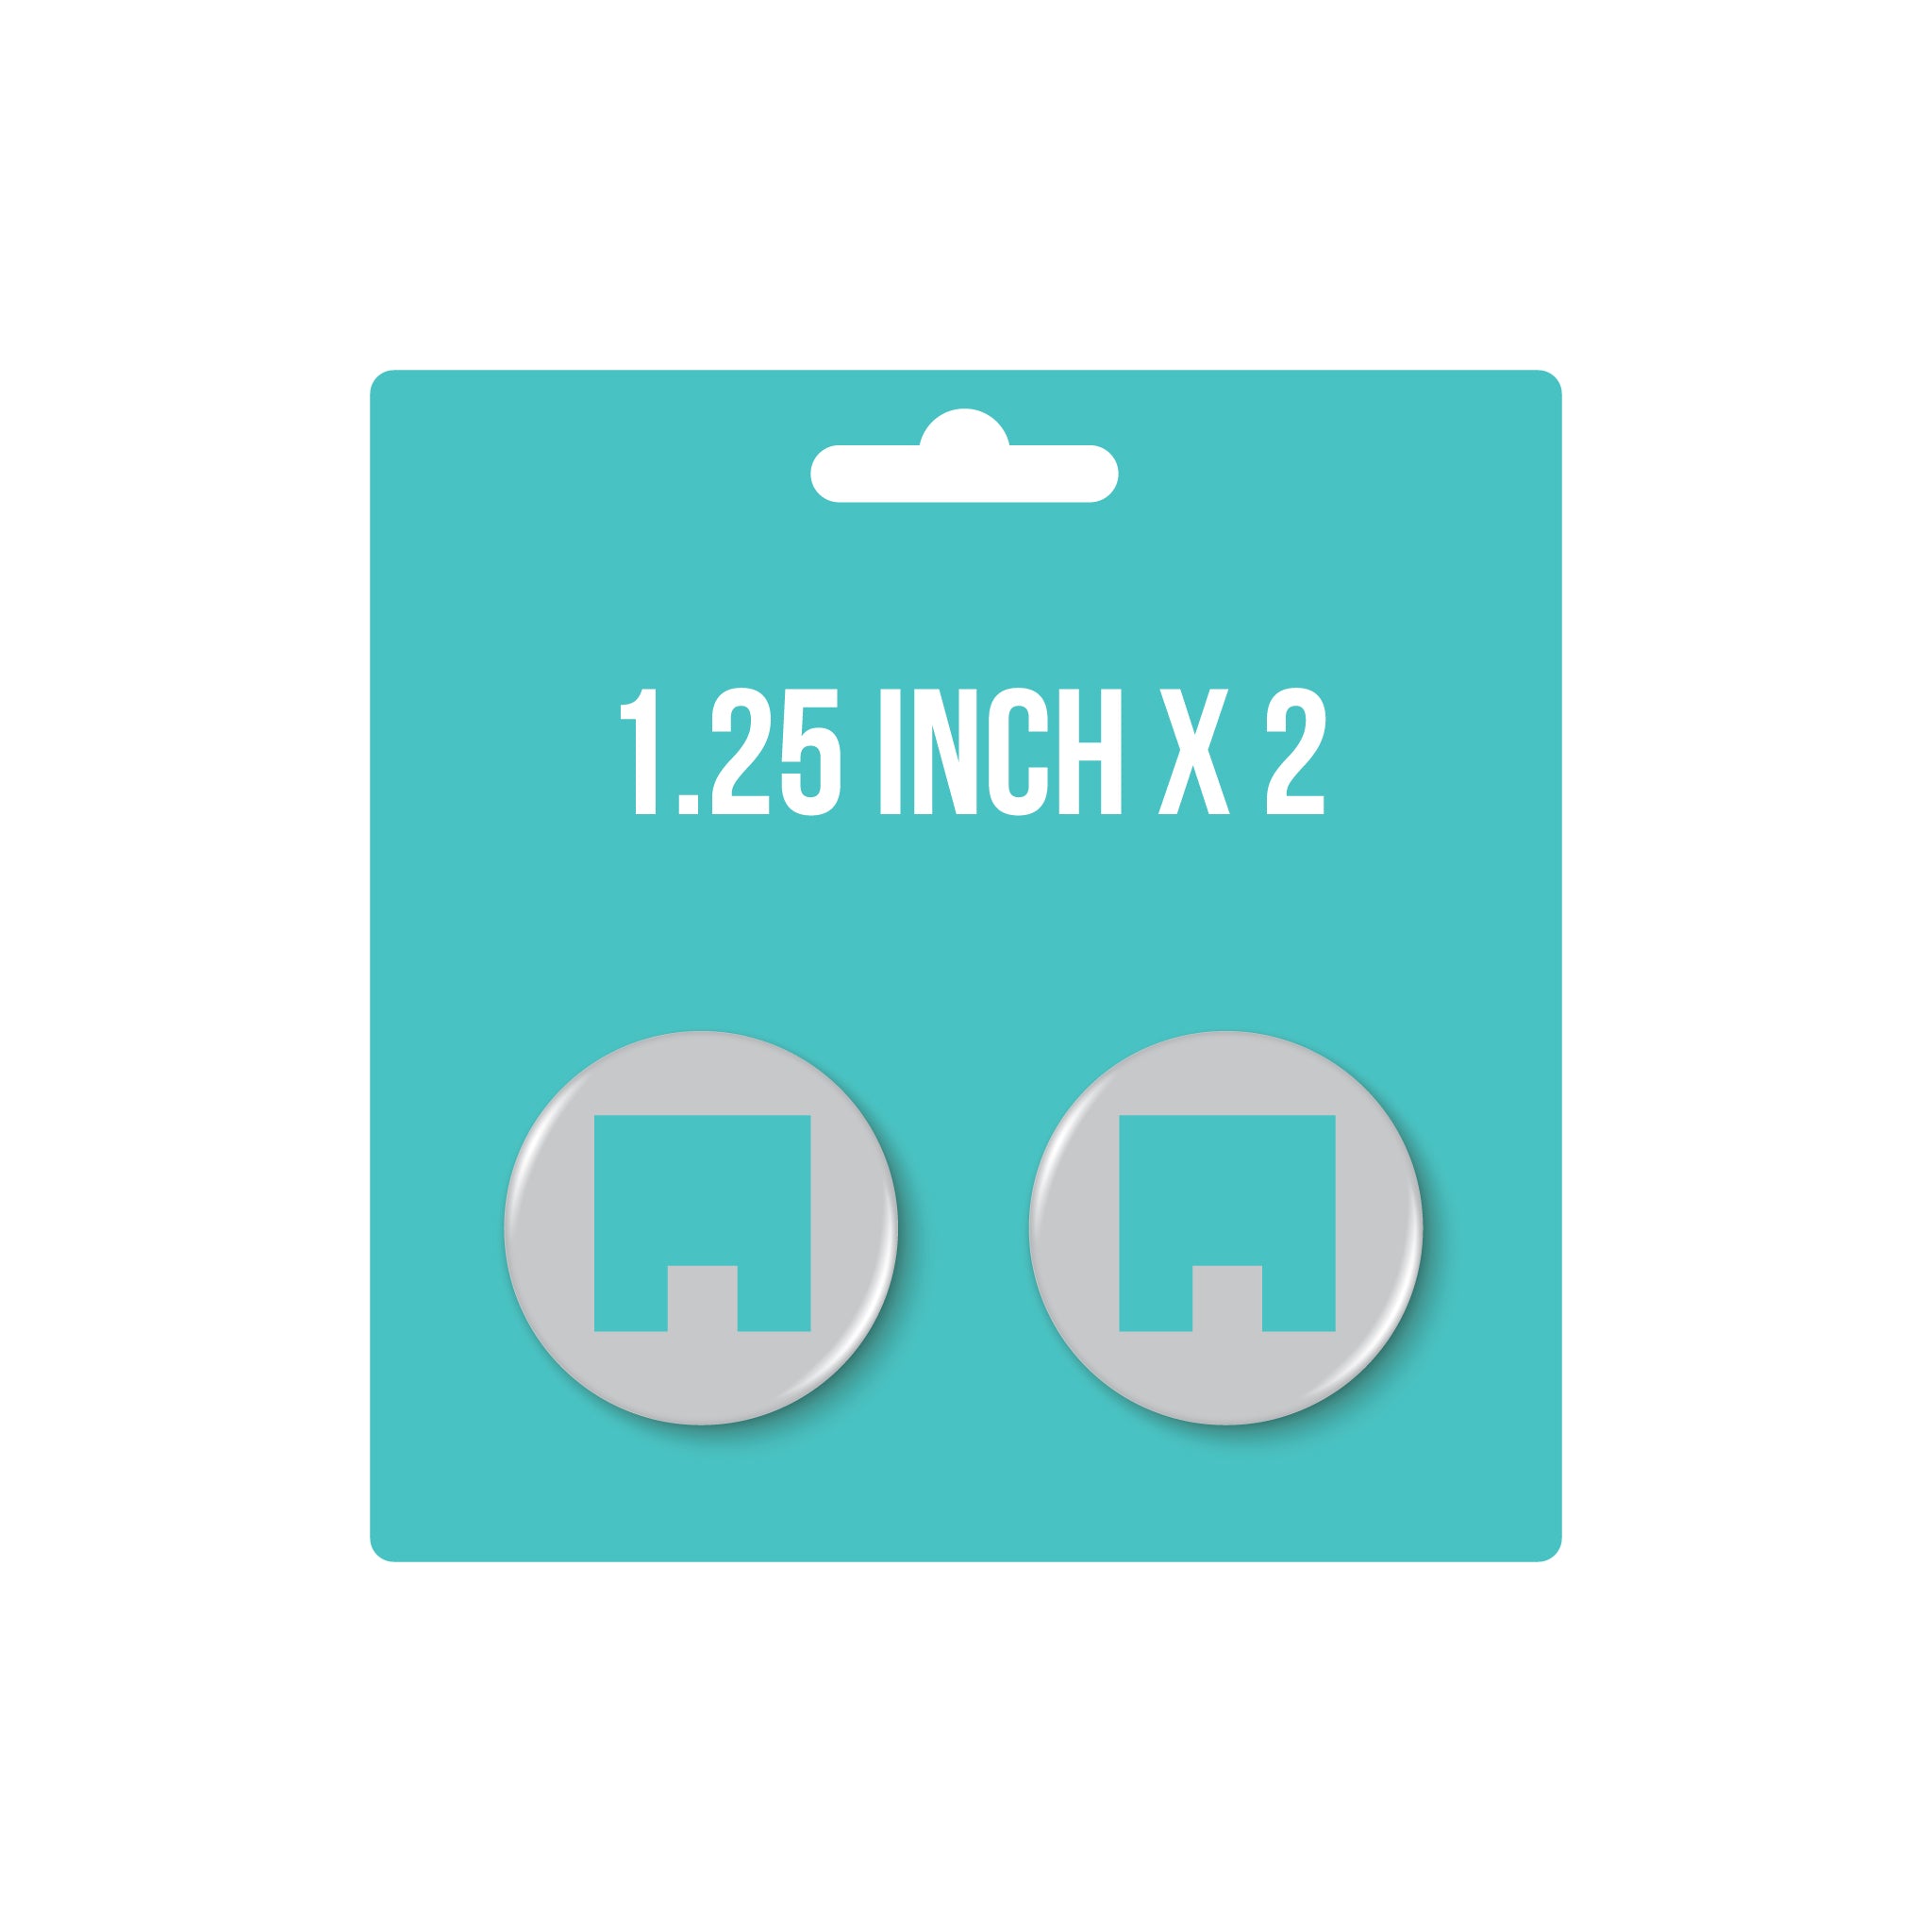 1.25" x 2 Button Pack